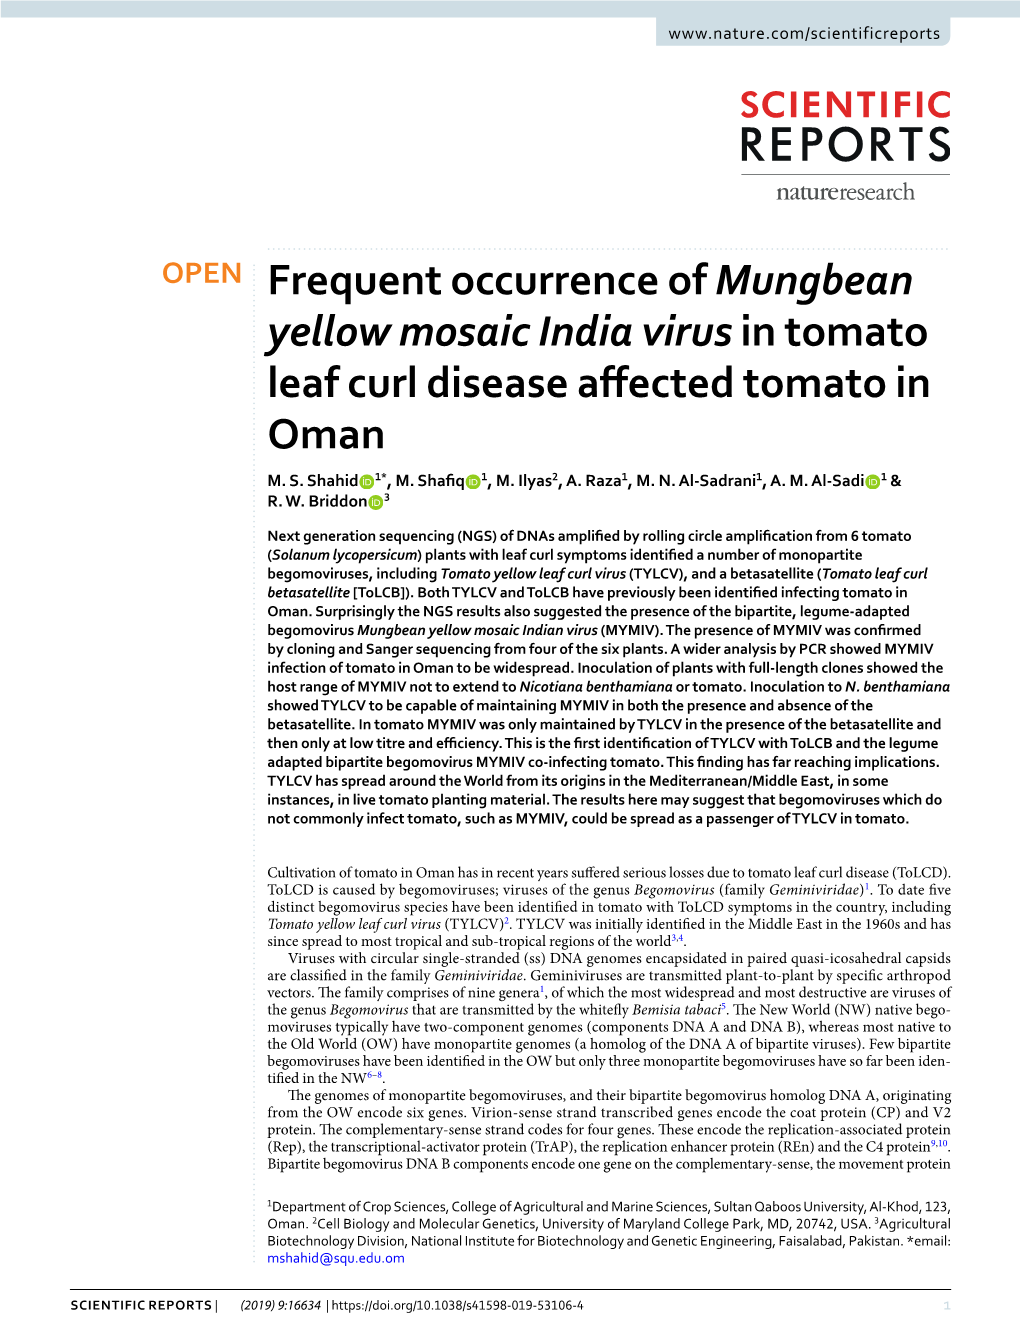 Frequent Occurrence of Mungbean Yellow Mosaic India Virus in Tomato Leaf Curl Disease Afected Tomato in Oman M